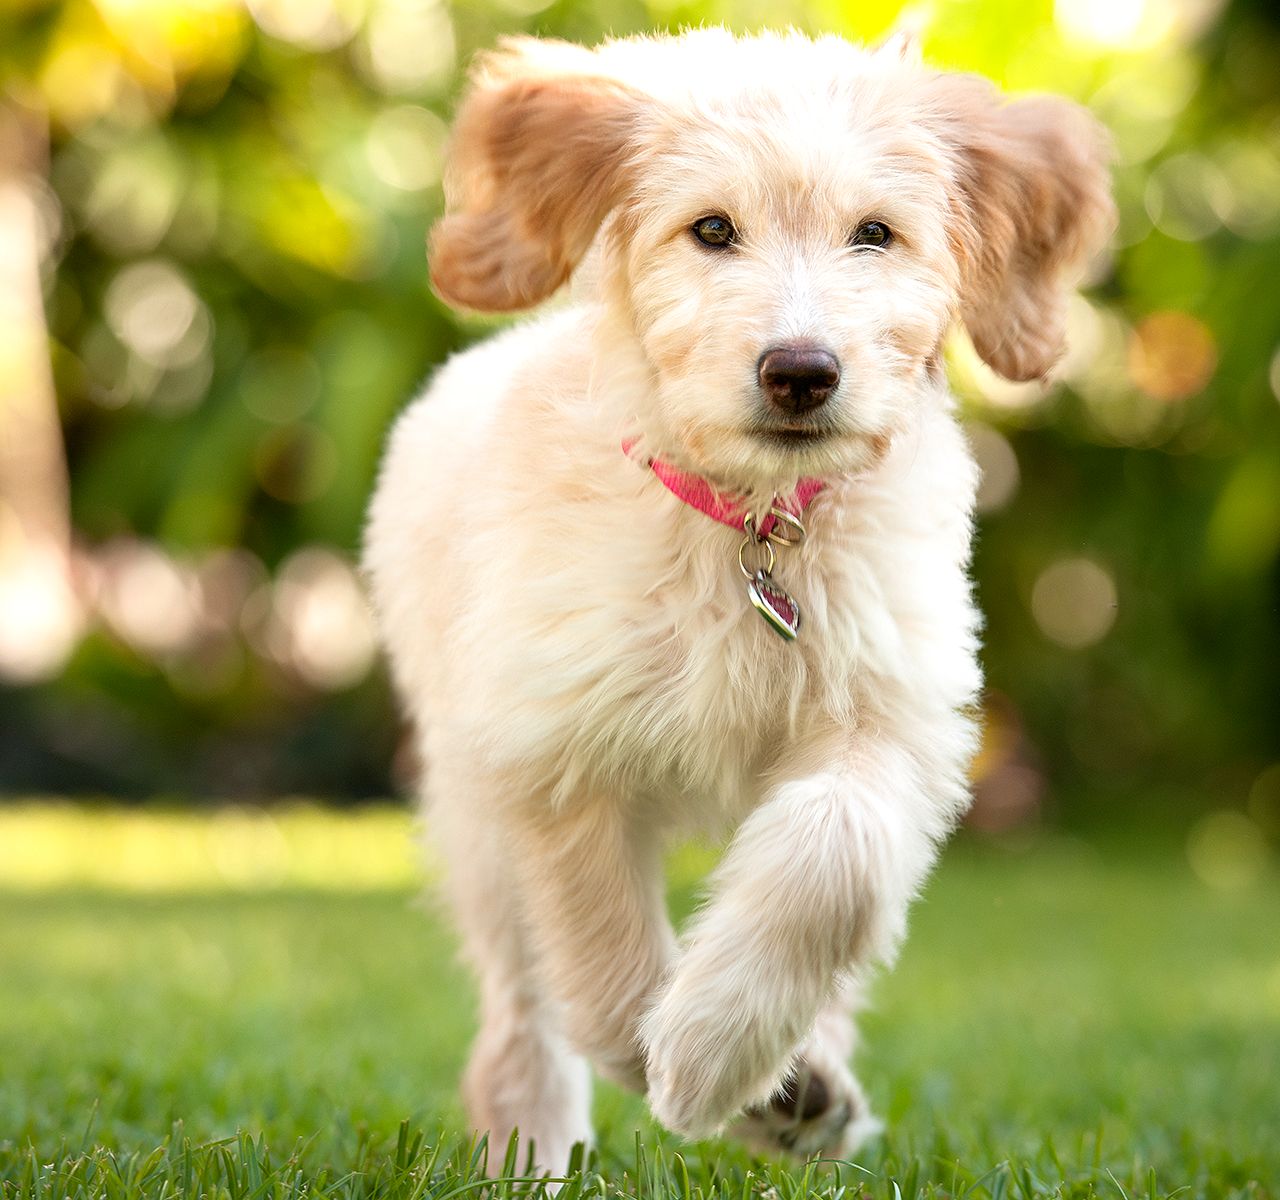 Vitamins, Minerals and Herbal Remedies for Dogs